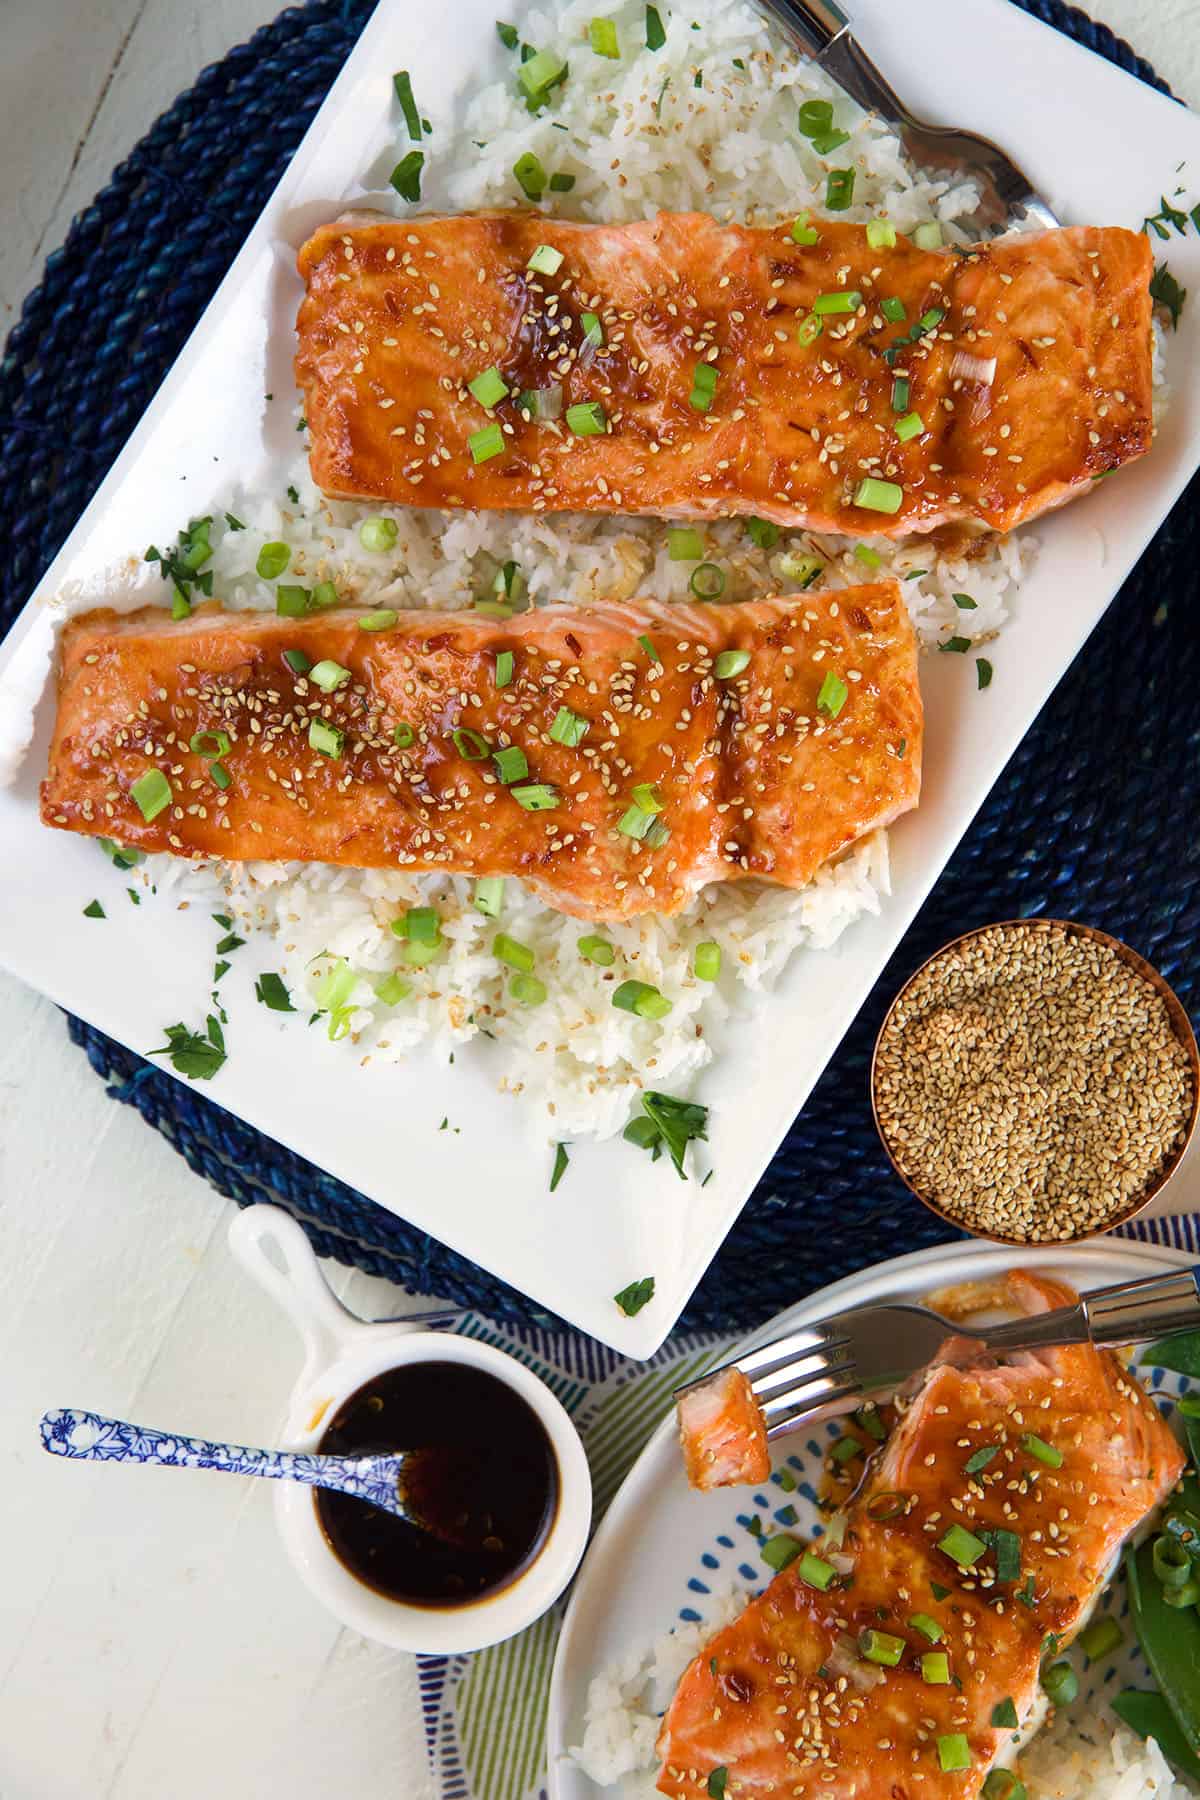 Two cooked salmon filets are placed on a bed of white rice on a rectangular white plate next to a small bowl of brown sauce.